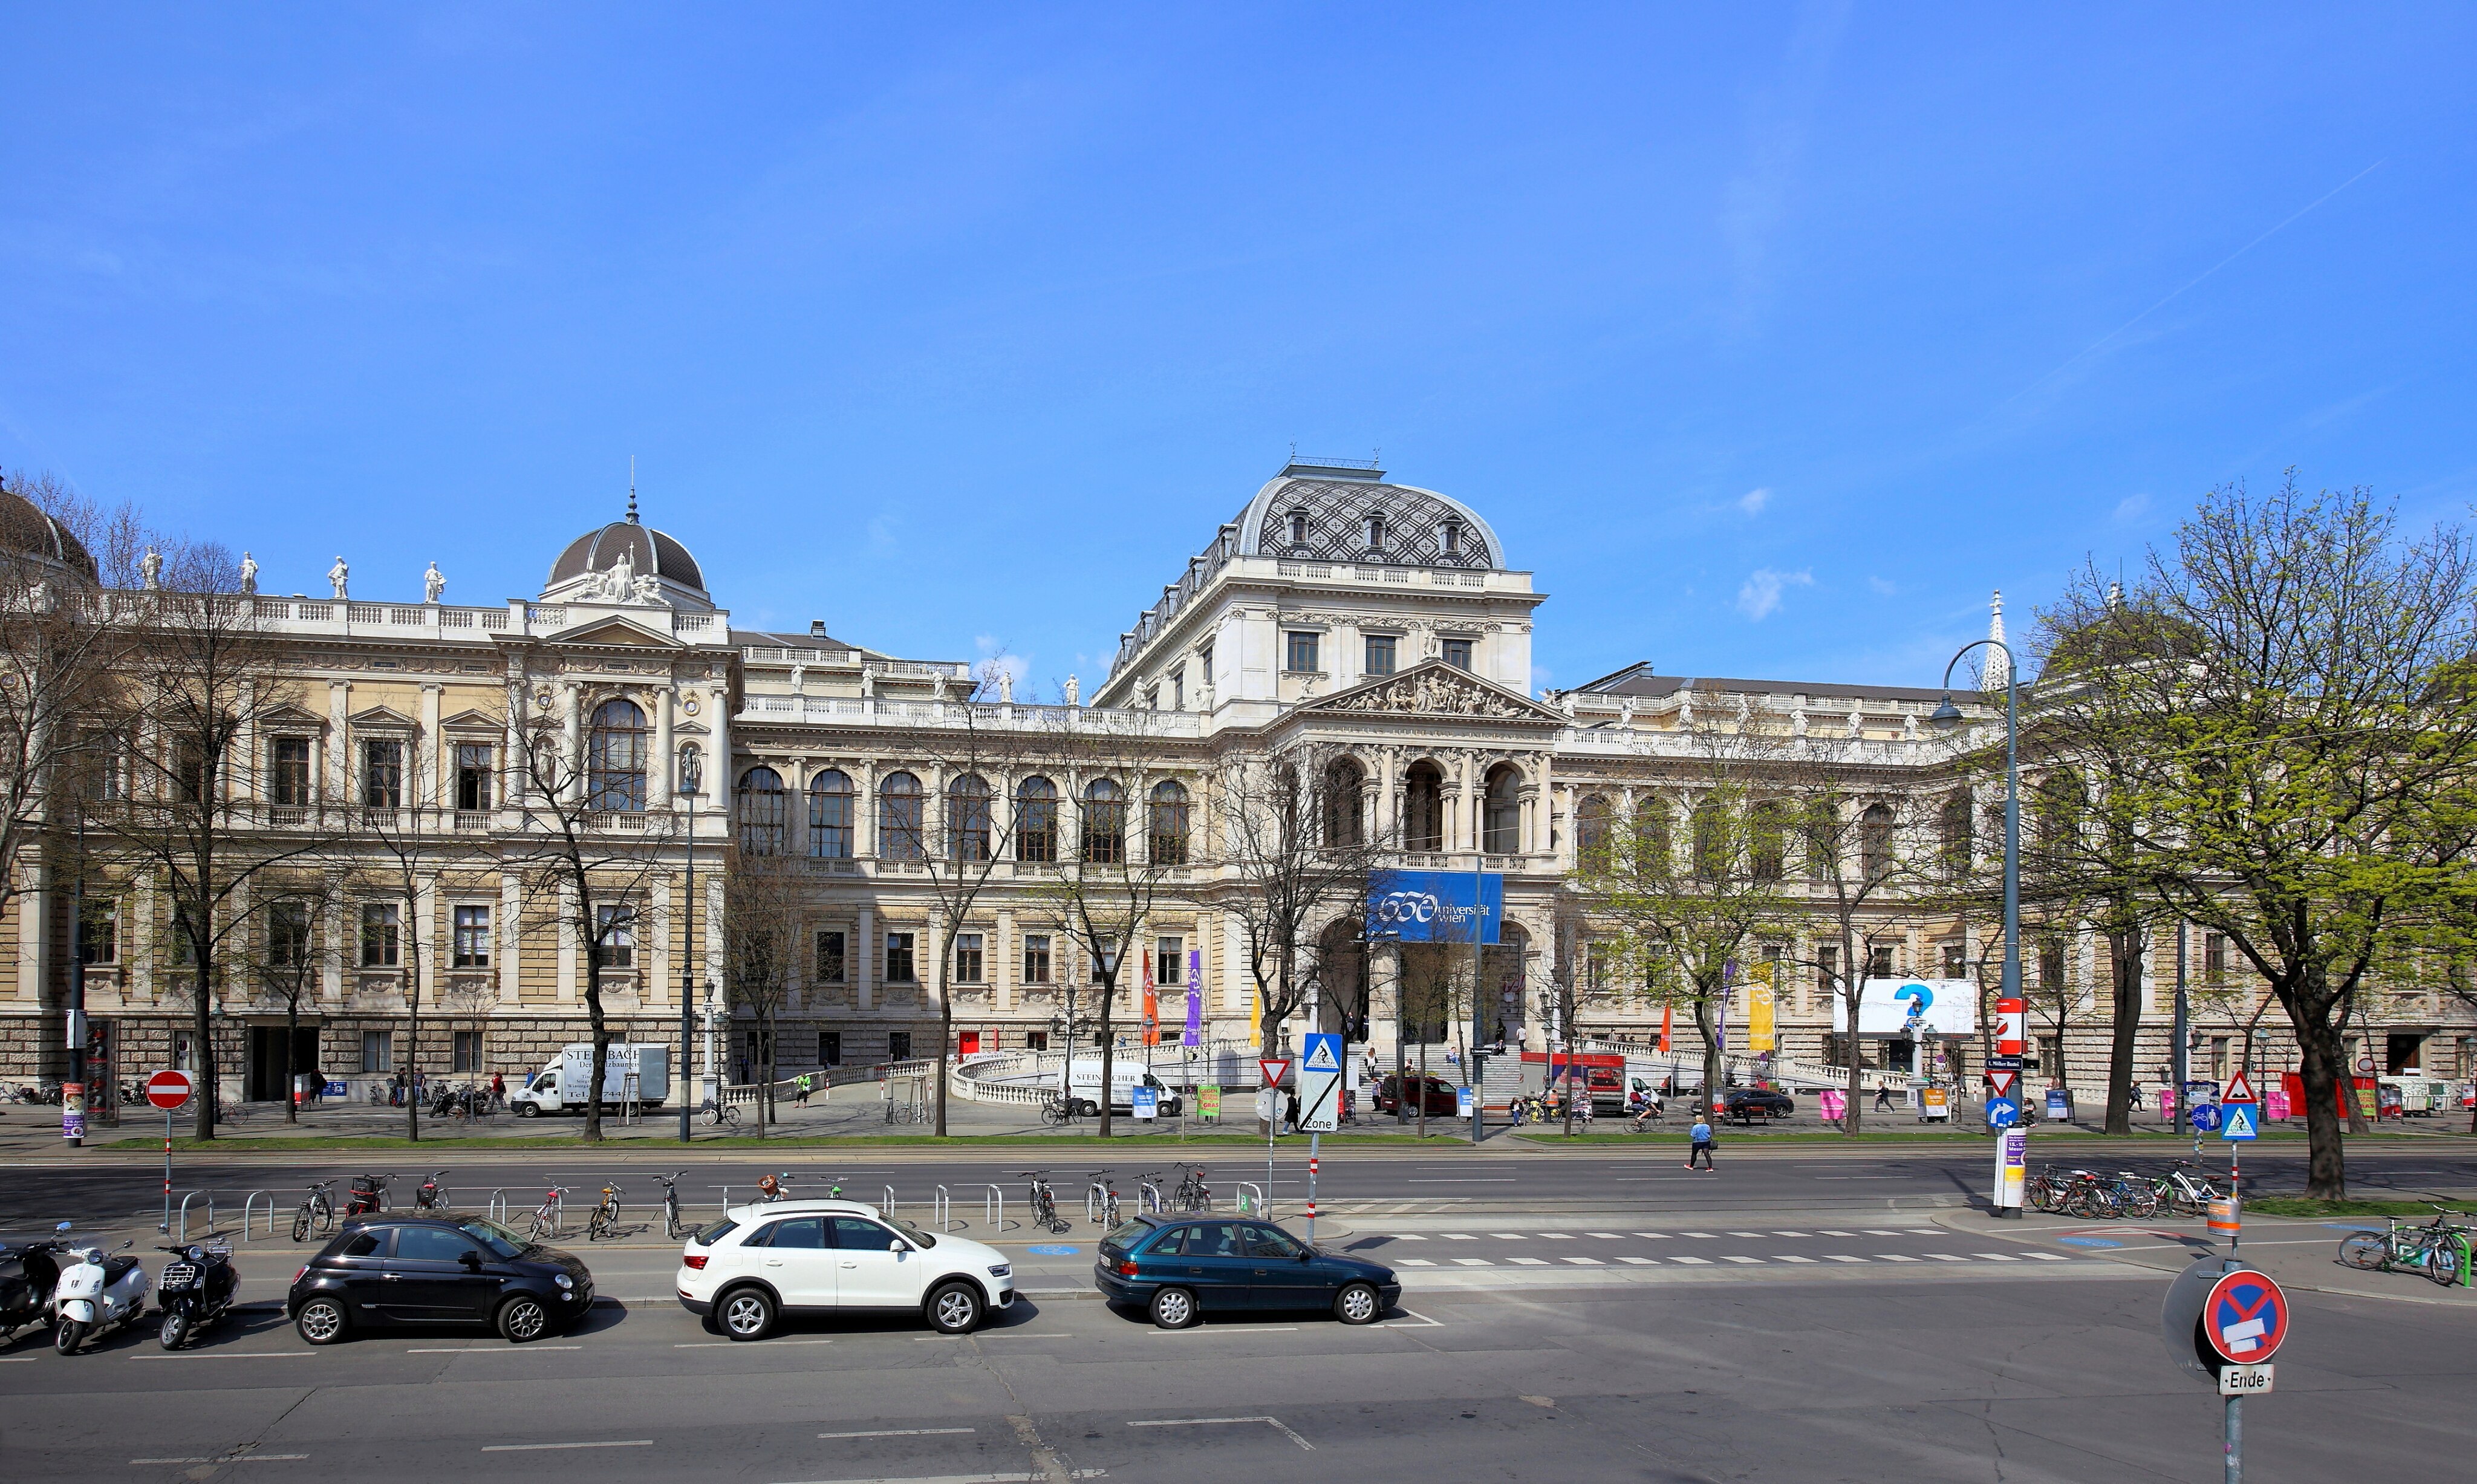 Facade of the main building of the University of Vienna on the Universitätsring in the Austrian capital Vienna. The university building was constructed from 1877 to 1884 according to plans by the architect Heinrich von Ferstel.